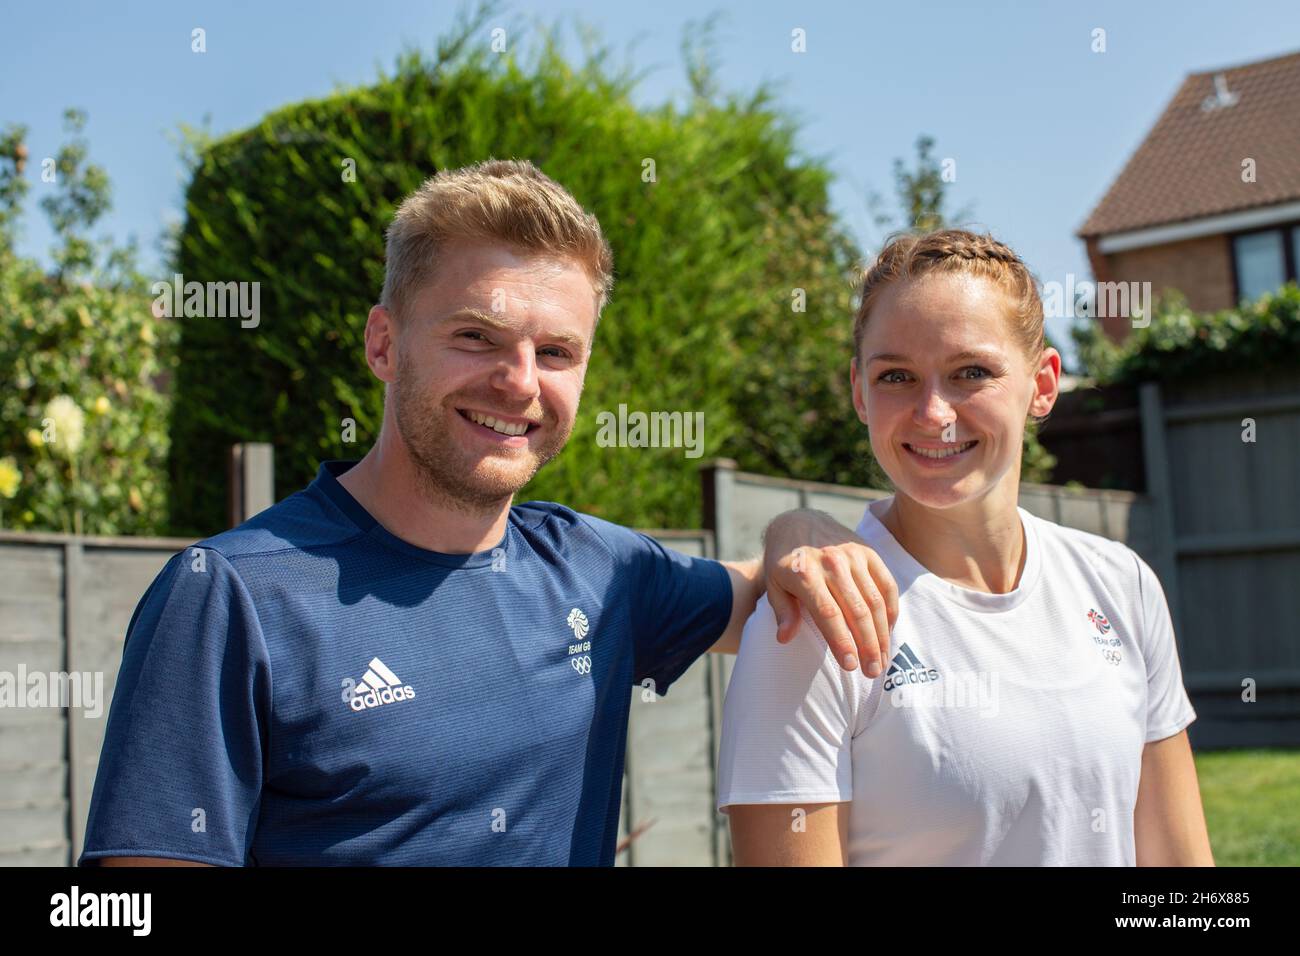 11/08/21 - Badminton England mixed doubles players Marcus Ellis and Lauren Smith at their home following Covid-19 lockdown in England. Stock Photo